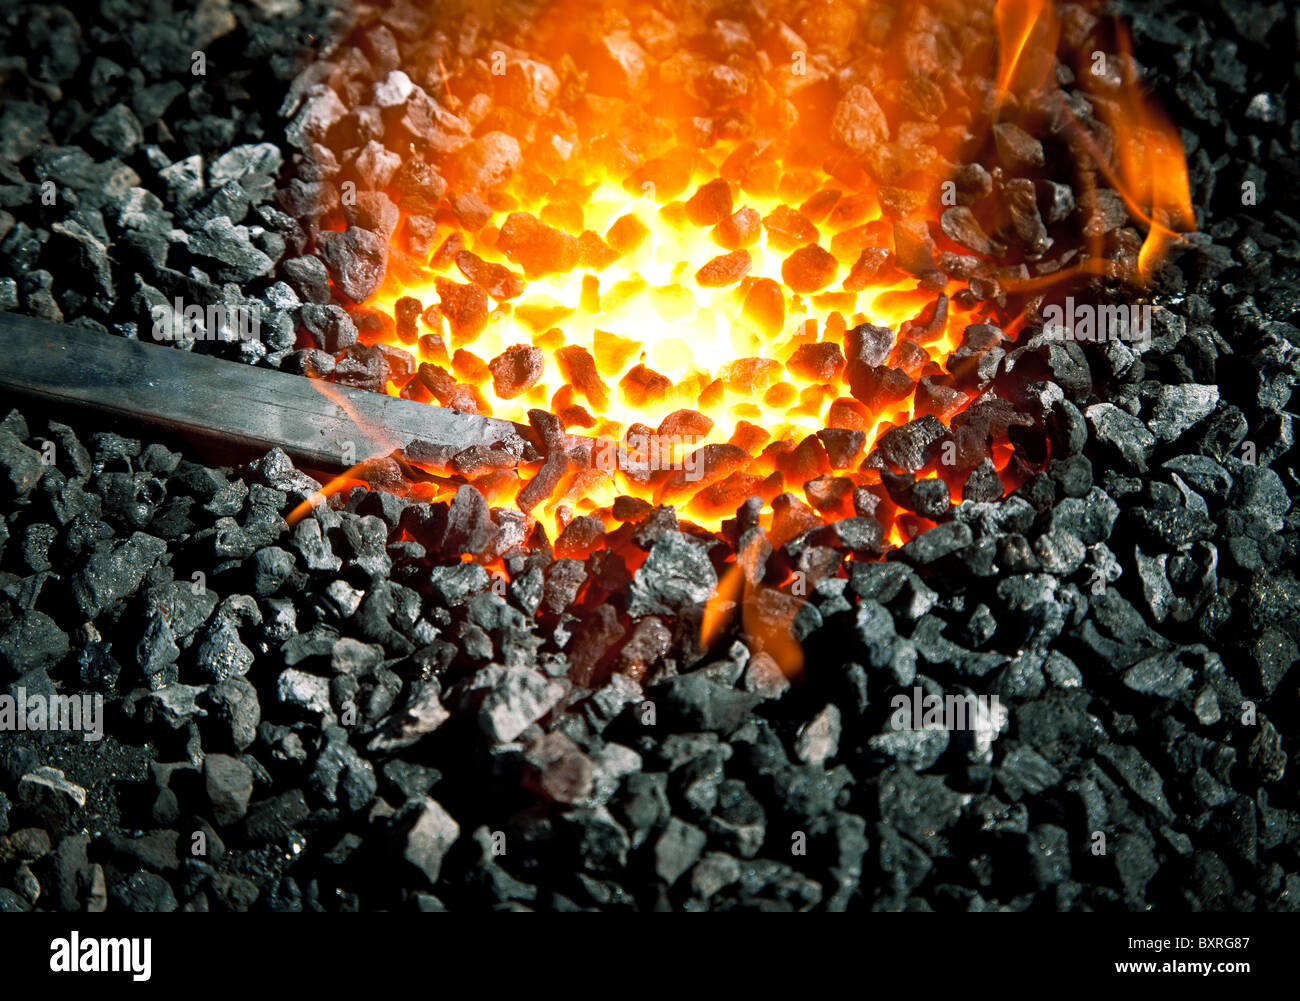 Old-fashioned blacksmith furnace with burning coals (focus is on the iron) Stock Photo